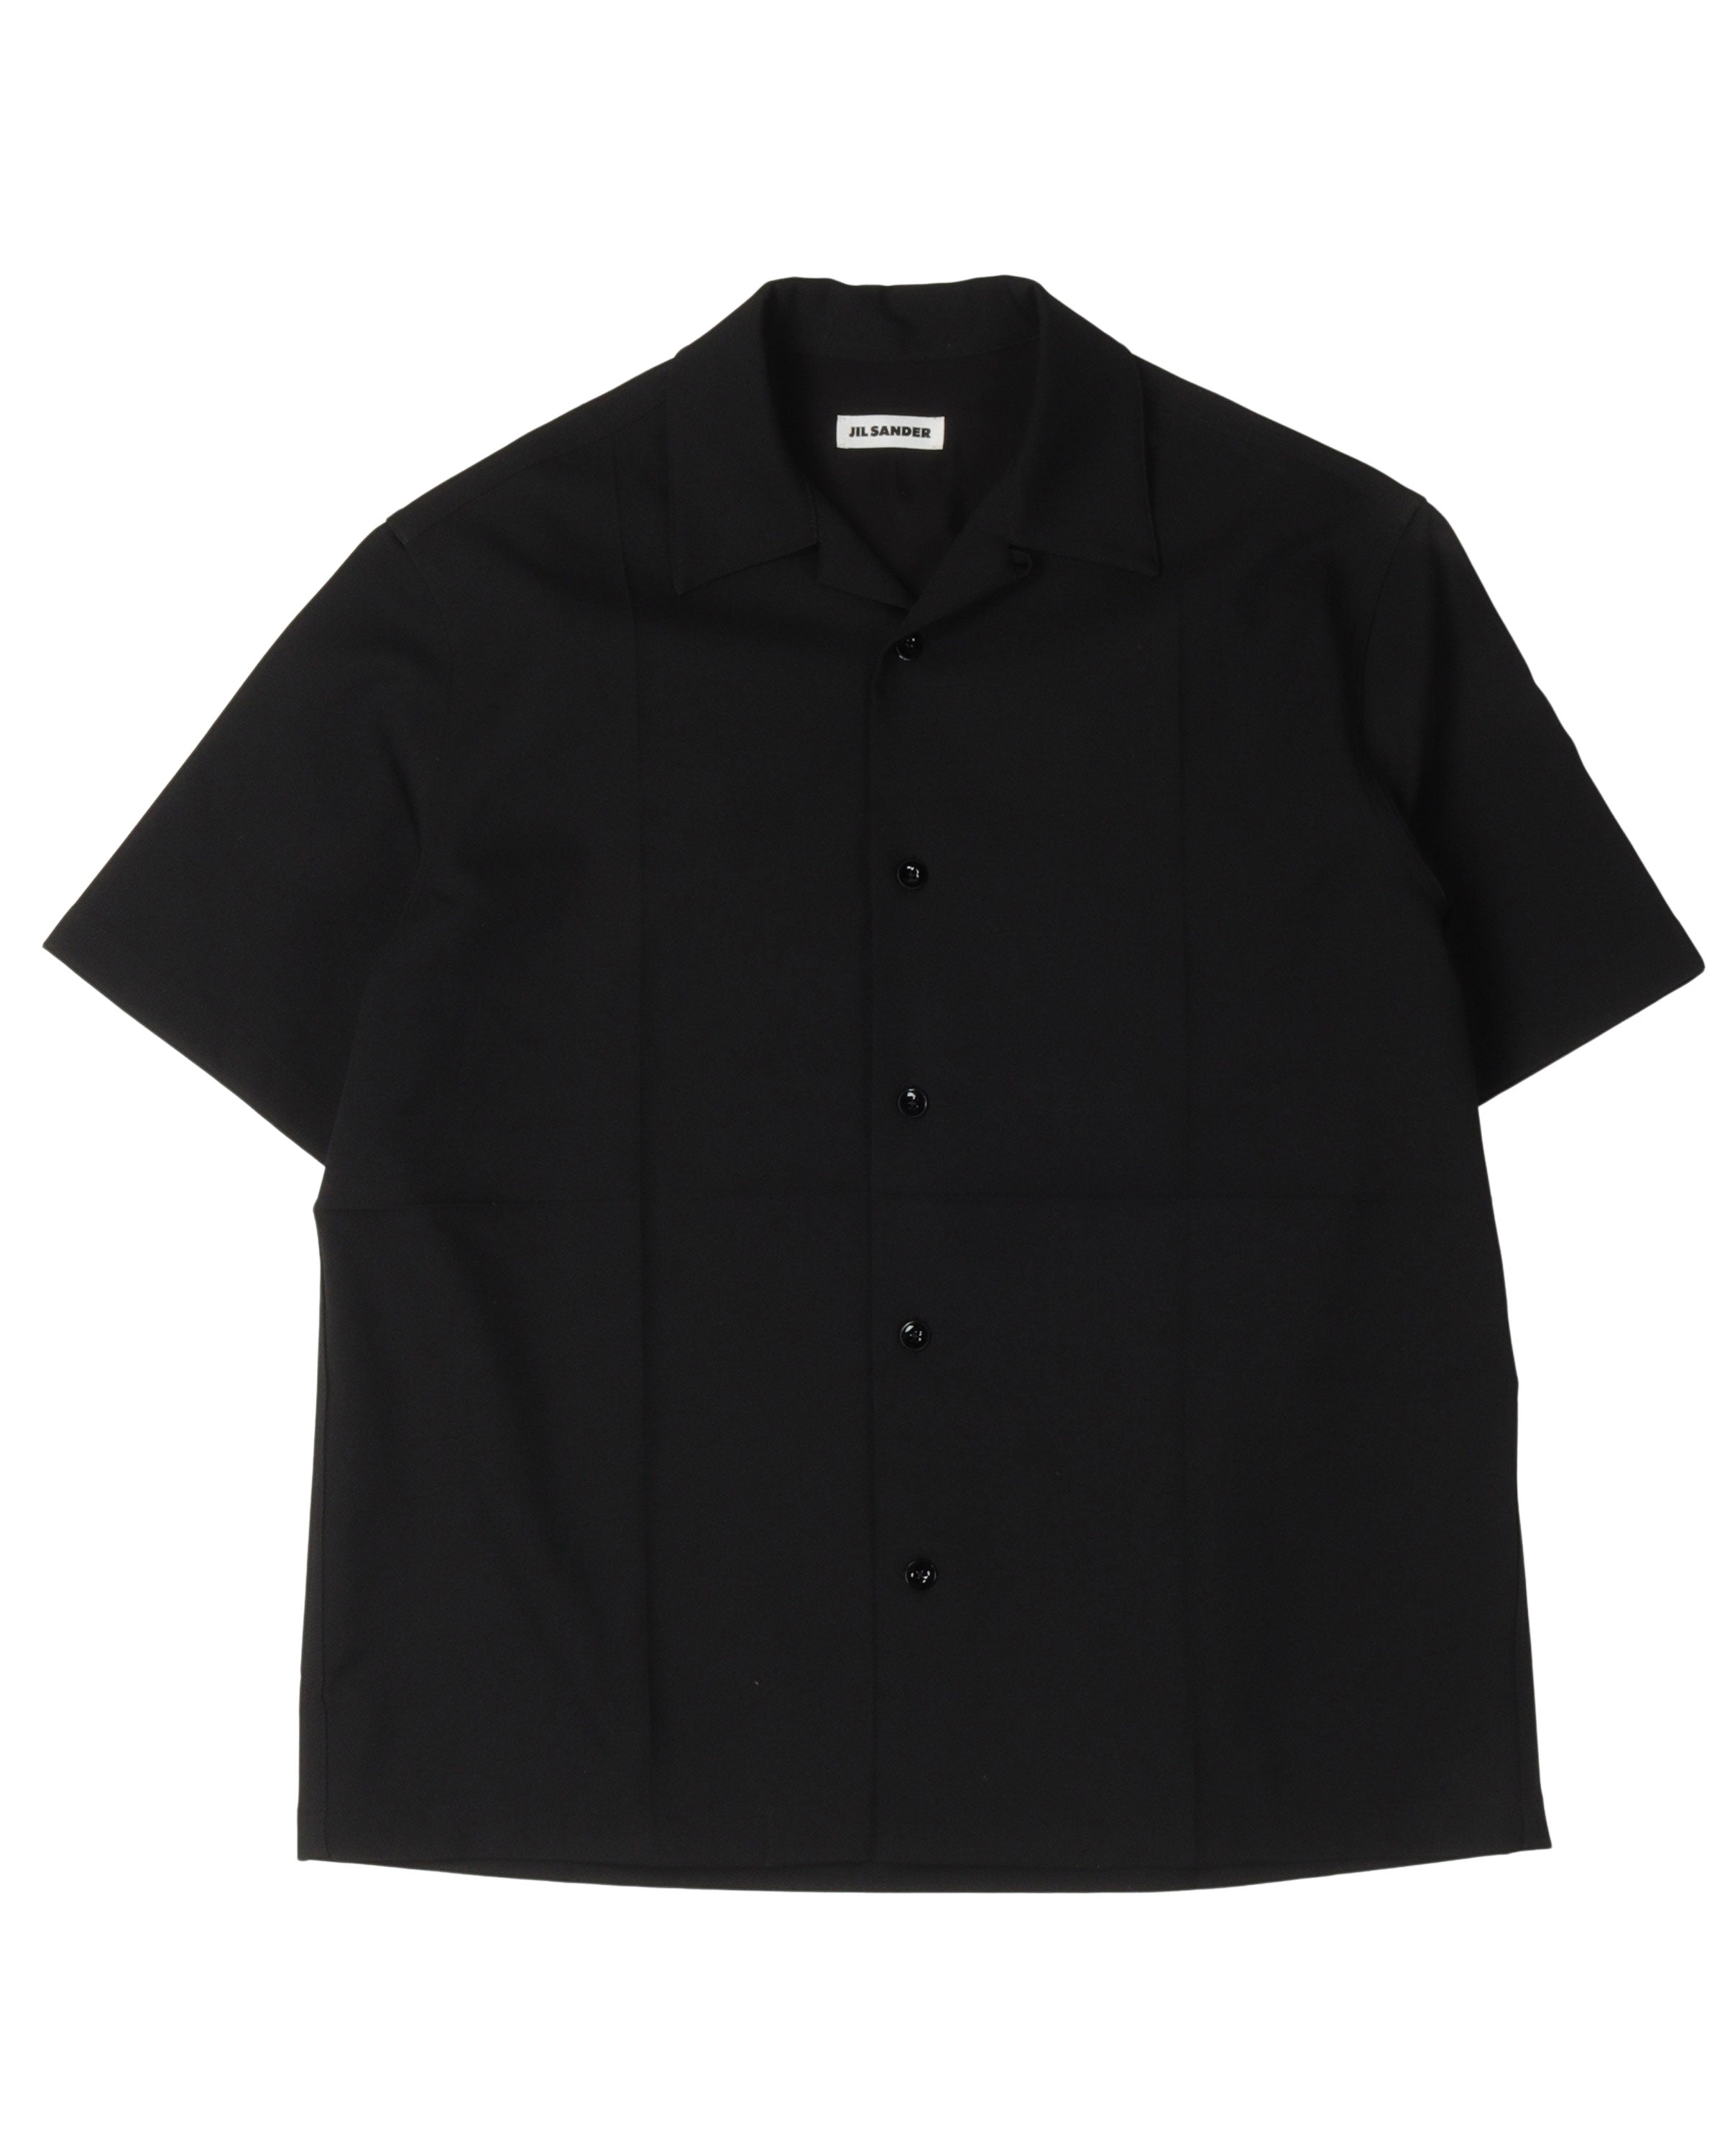 Polyester Pleated Shirt